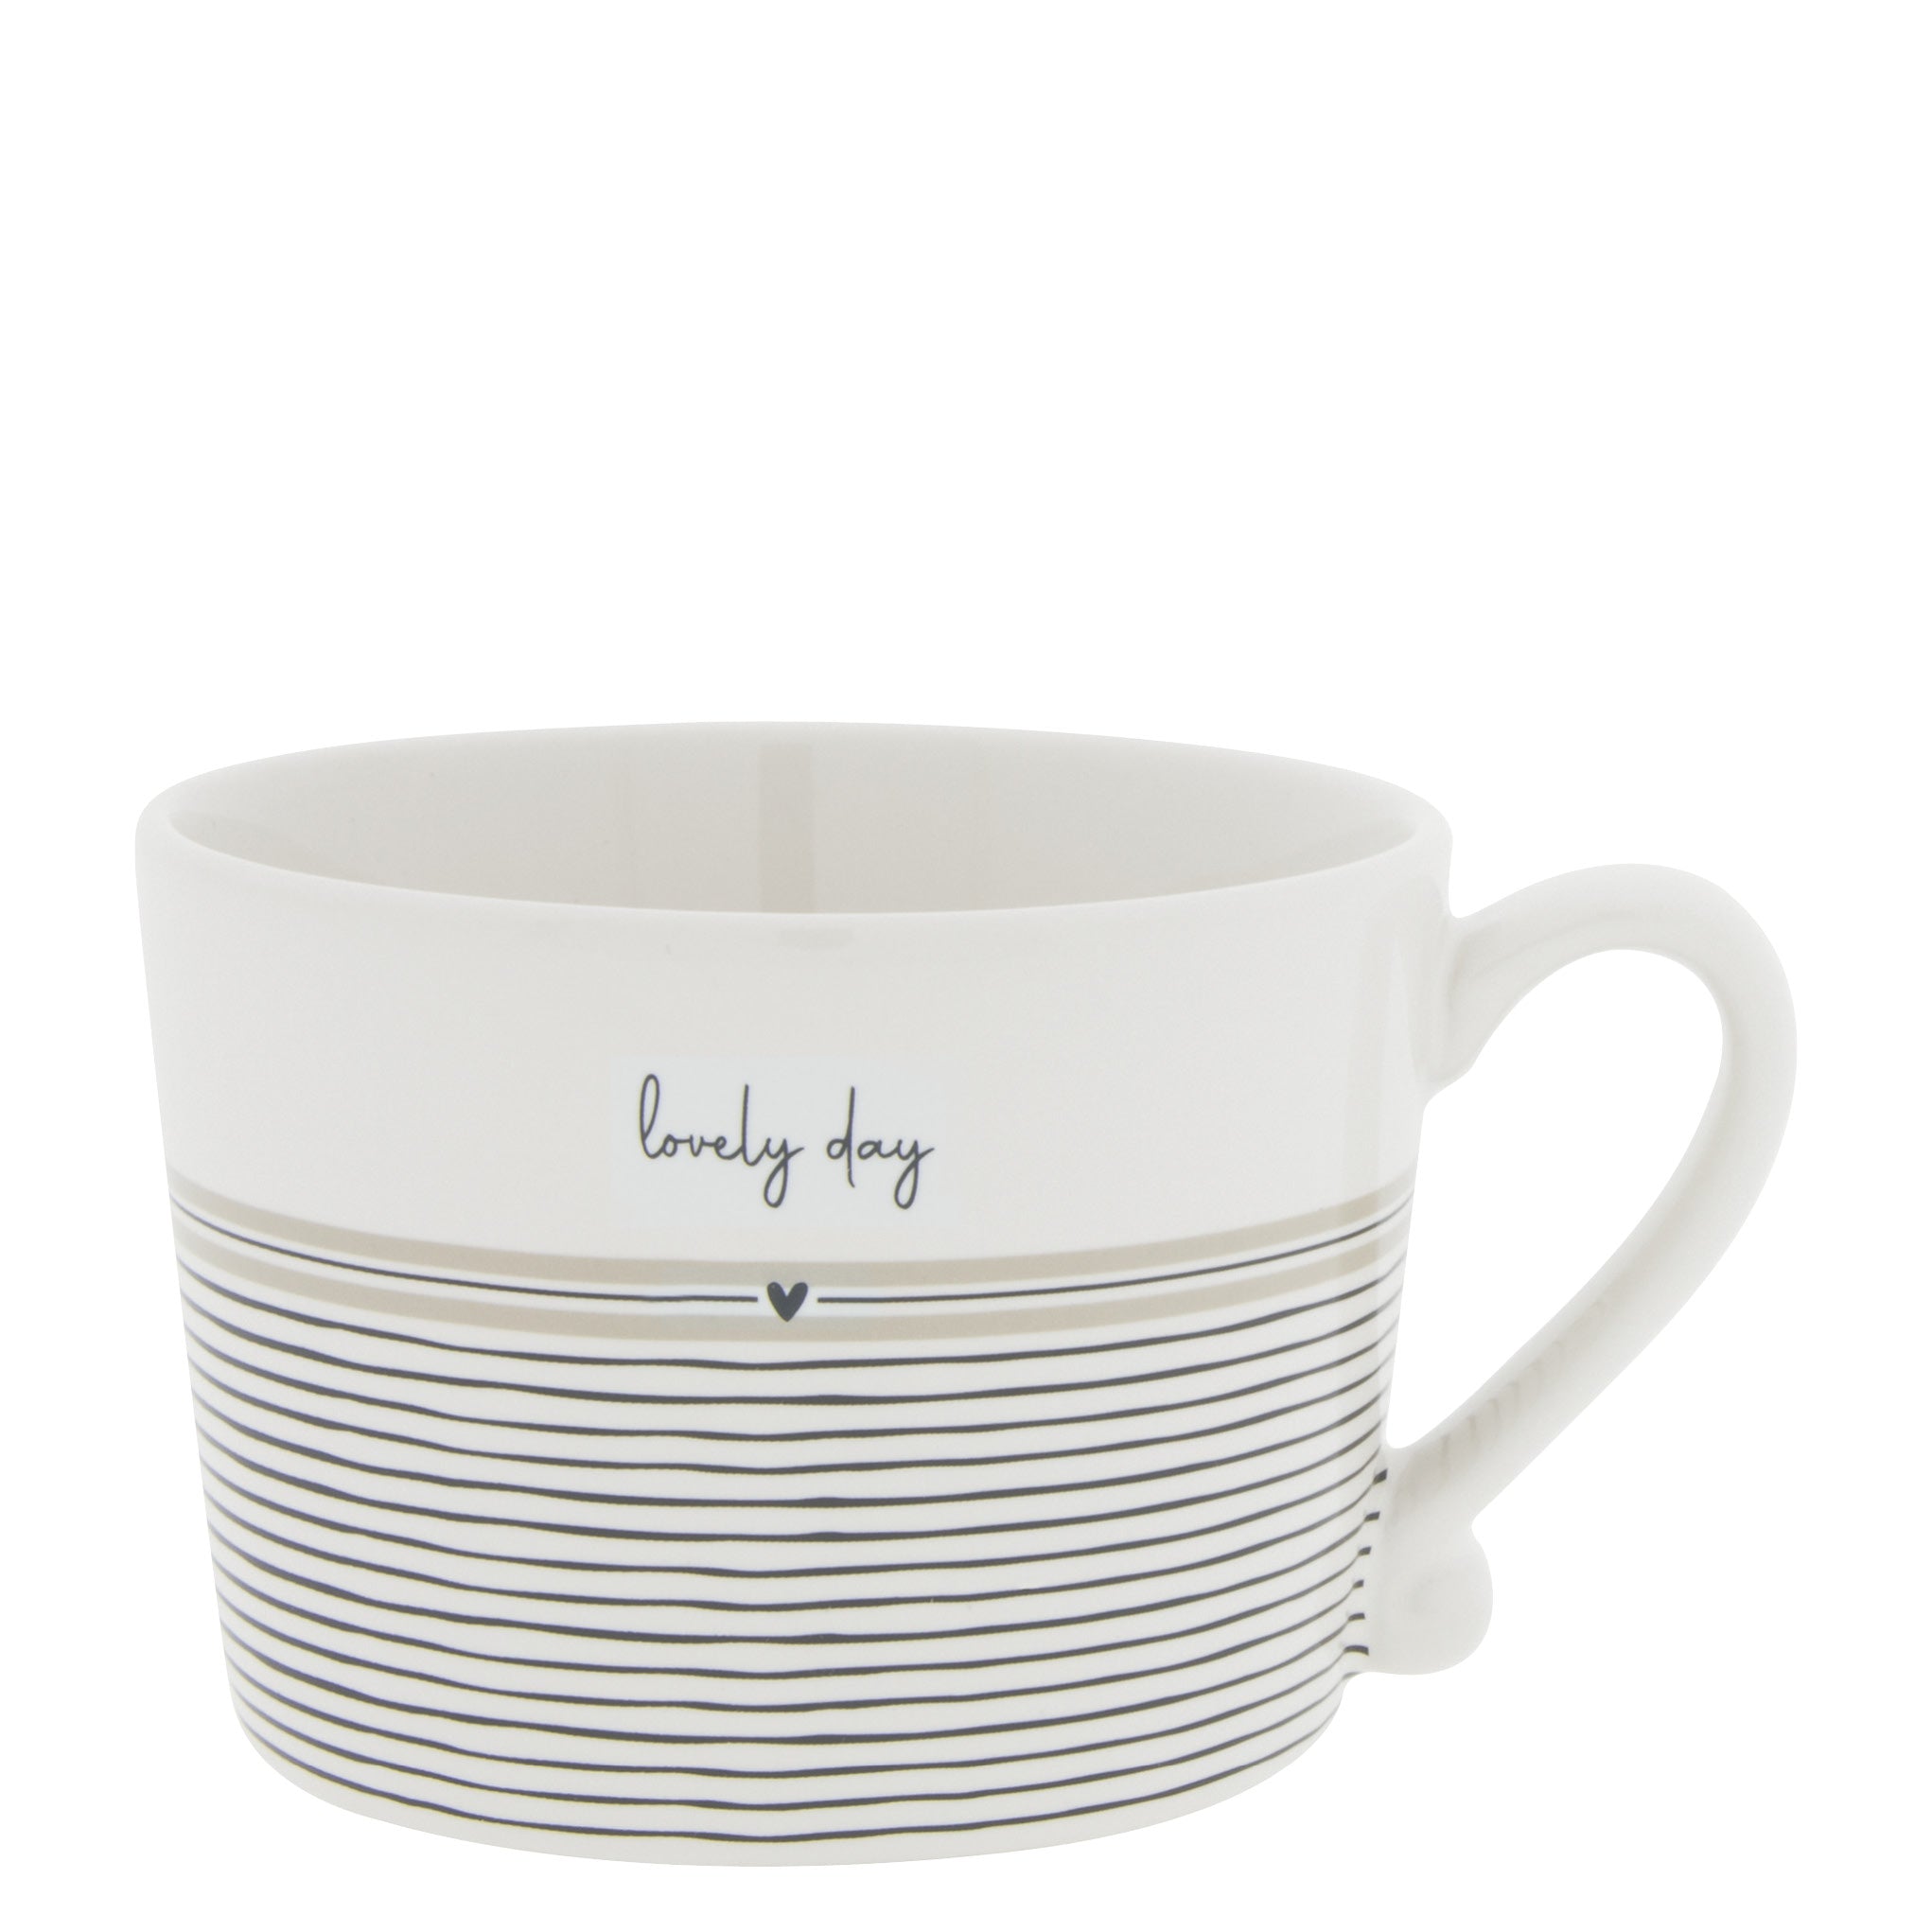 "Lovely Day" cup